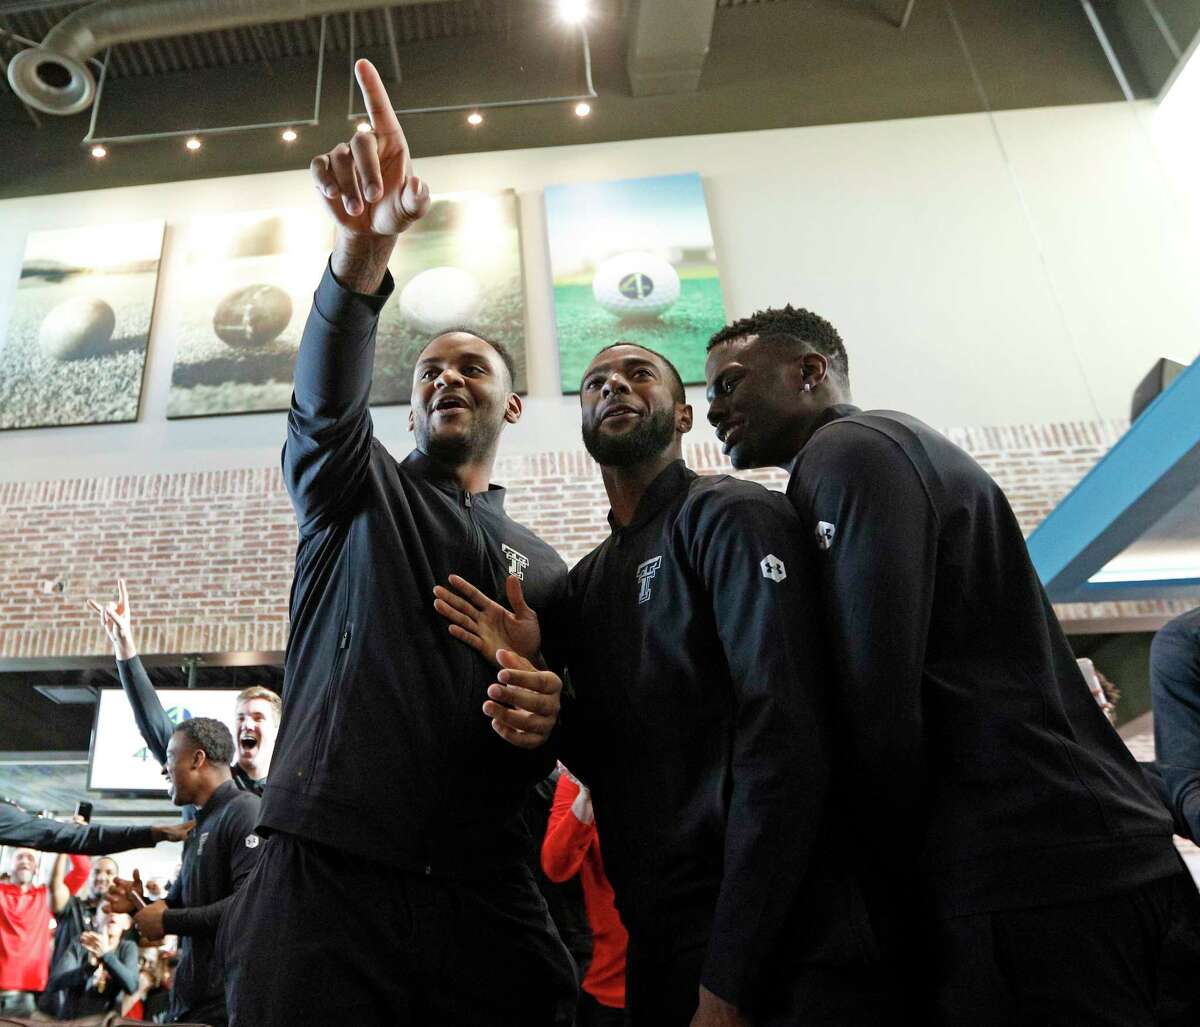 Texas Tech's Tommy Hamilton, Niem Stevenson and Norense Odiase celebrate after finding out where the Red Raiders will play during a watch party for the NCAA basketball tournament Sunday, March 11, 2018, in Lubbock, Texas. (Brad Tollefson/Lubbock Avalanche-Journal via AP)